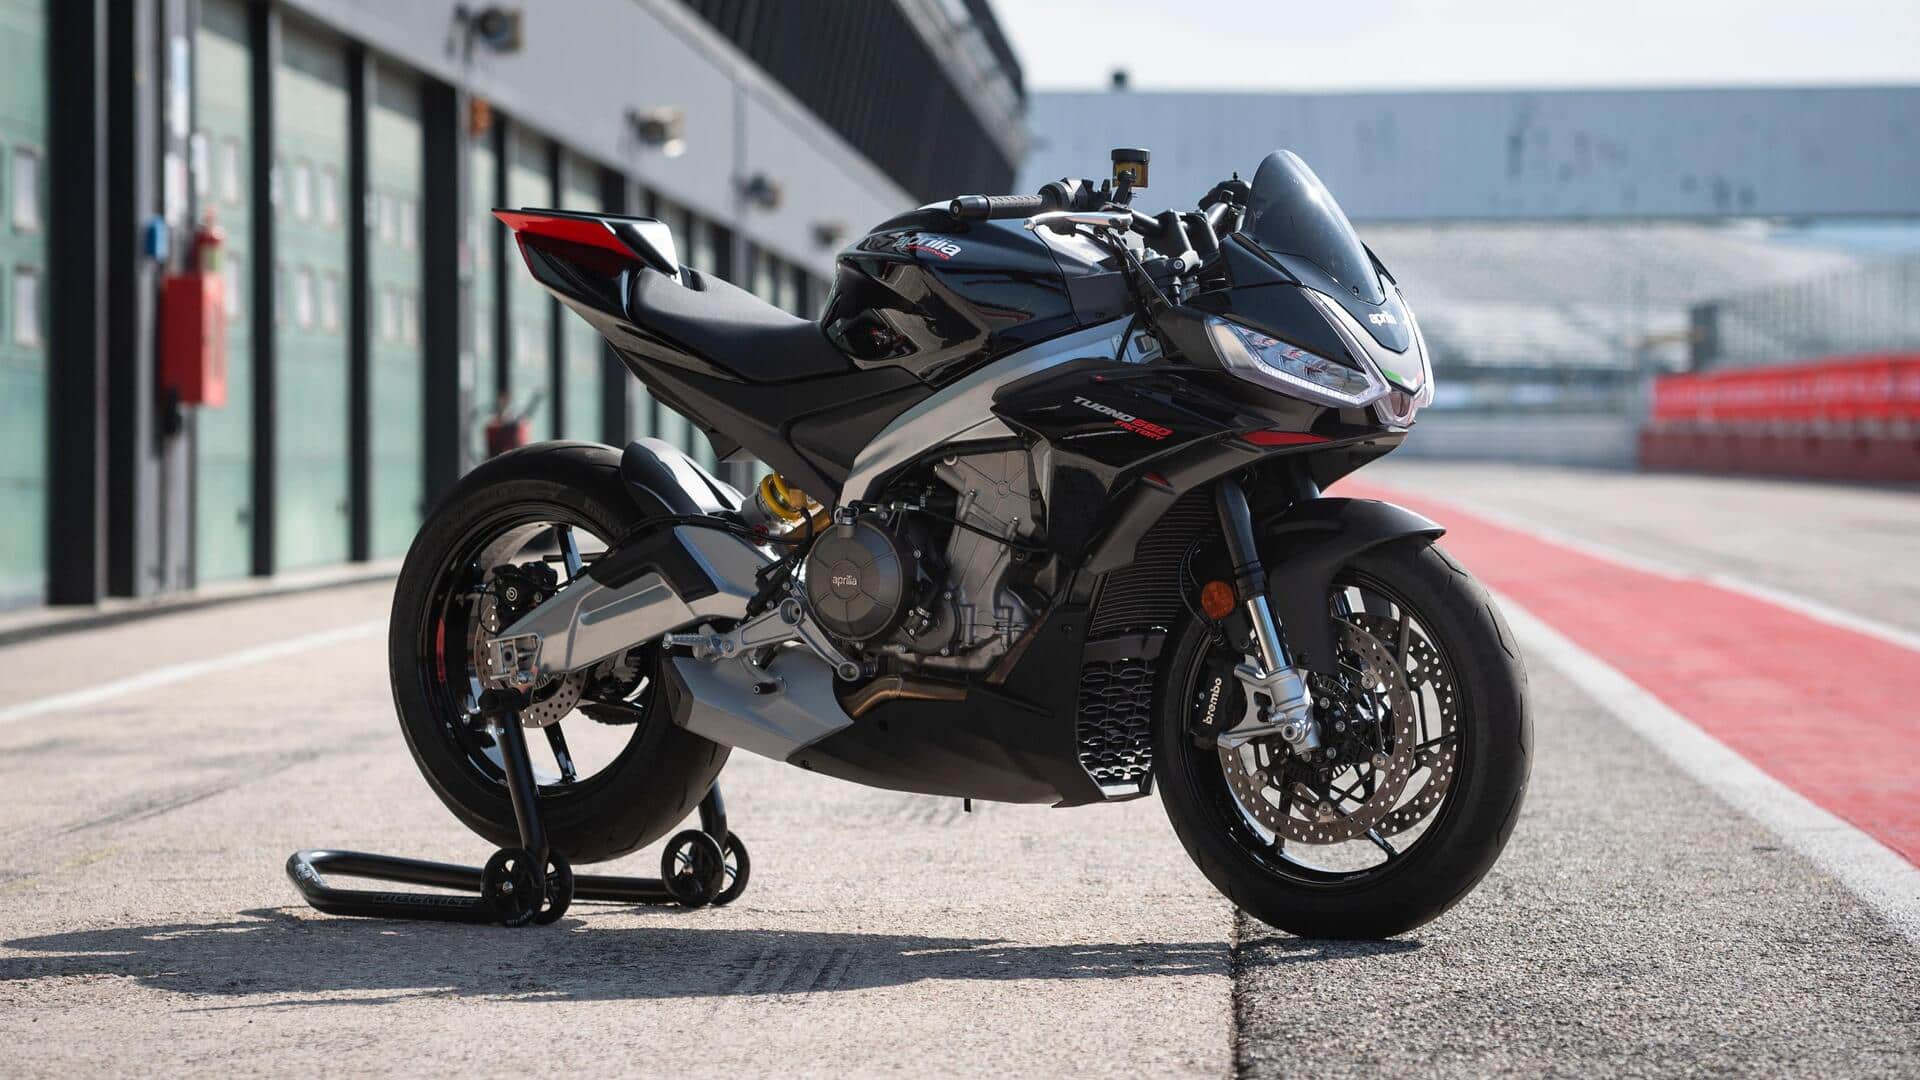 Aprilia RS 440 supersport bike in the works, spotted testing